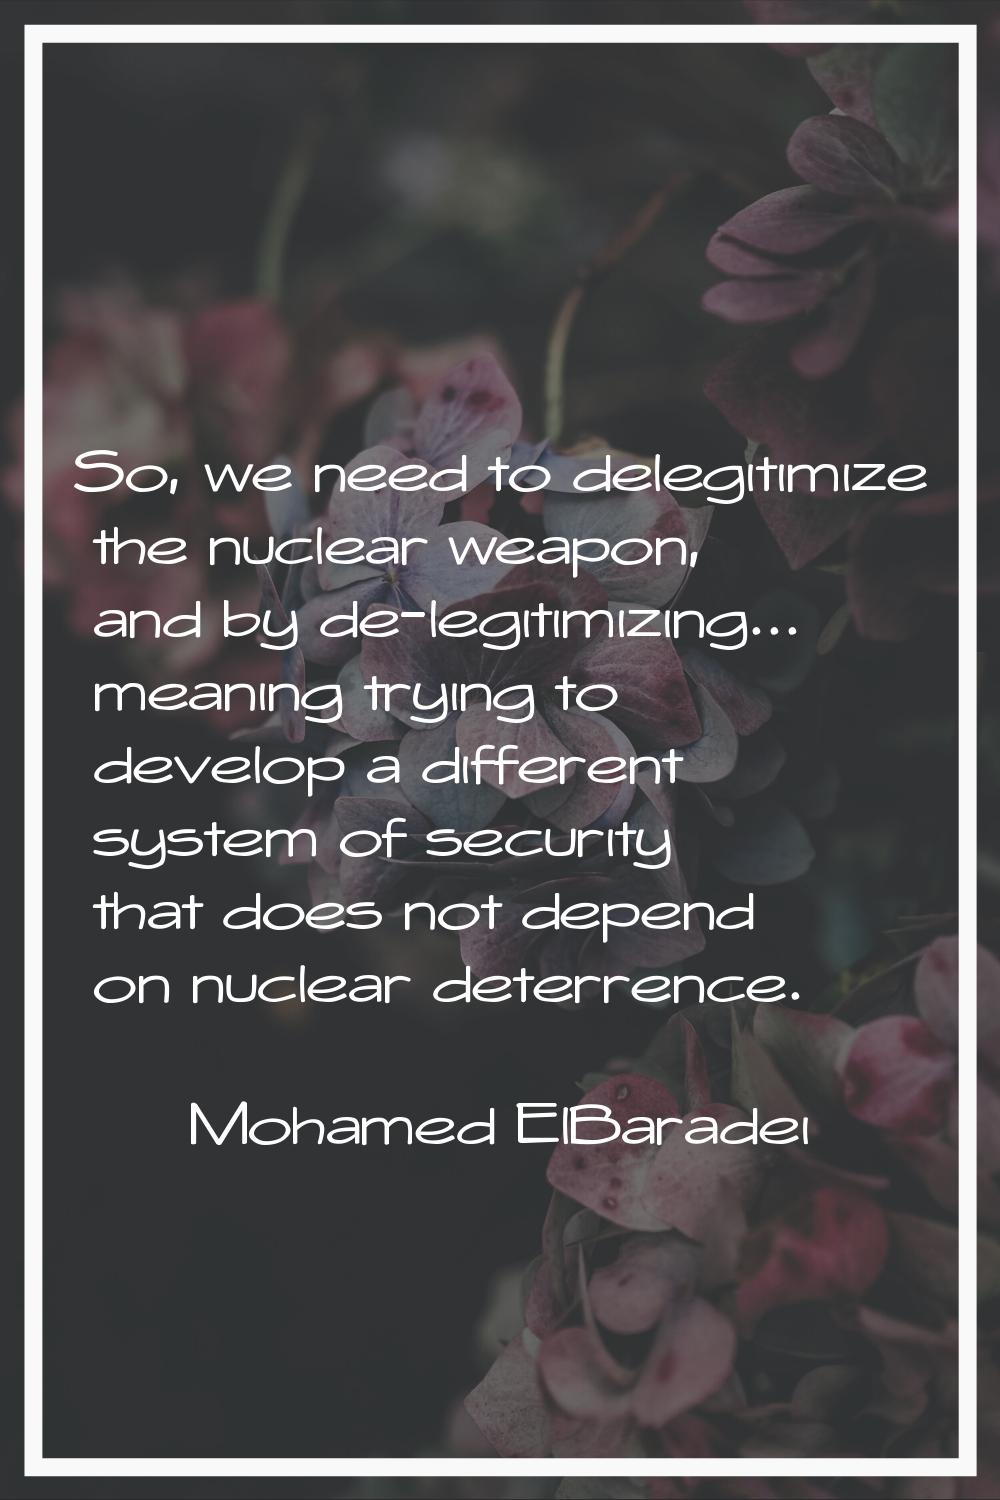 So, we need to delegitimize the nuclear weapon, and by de-legitimizing... meaning trying to develop